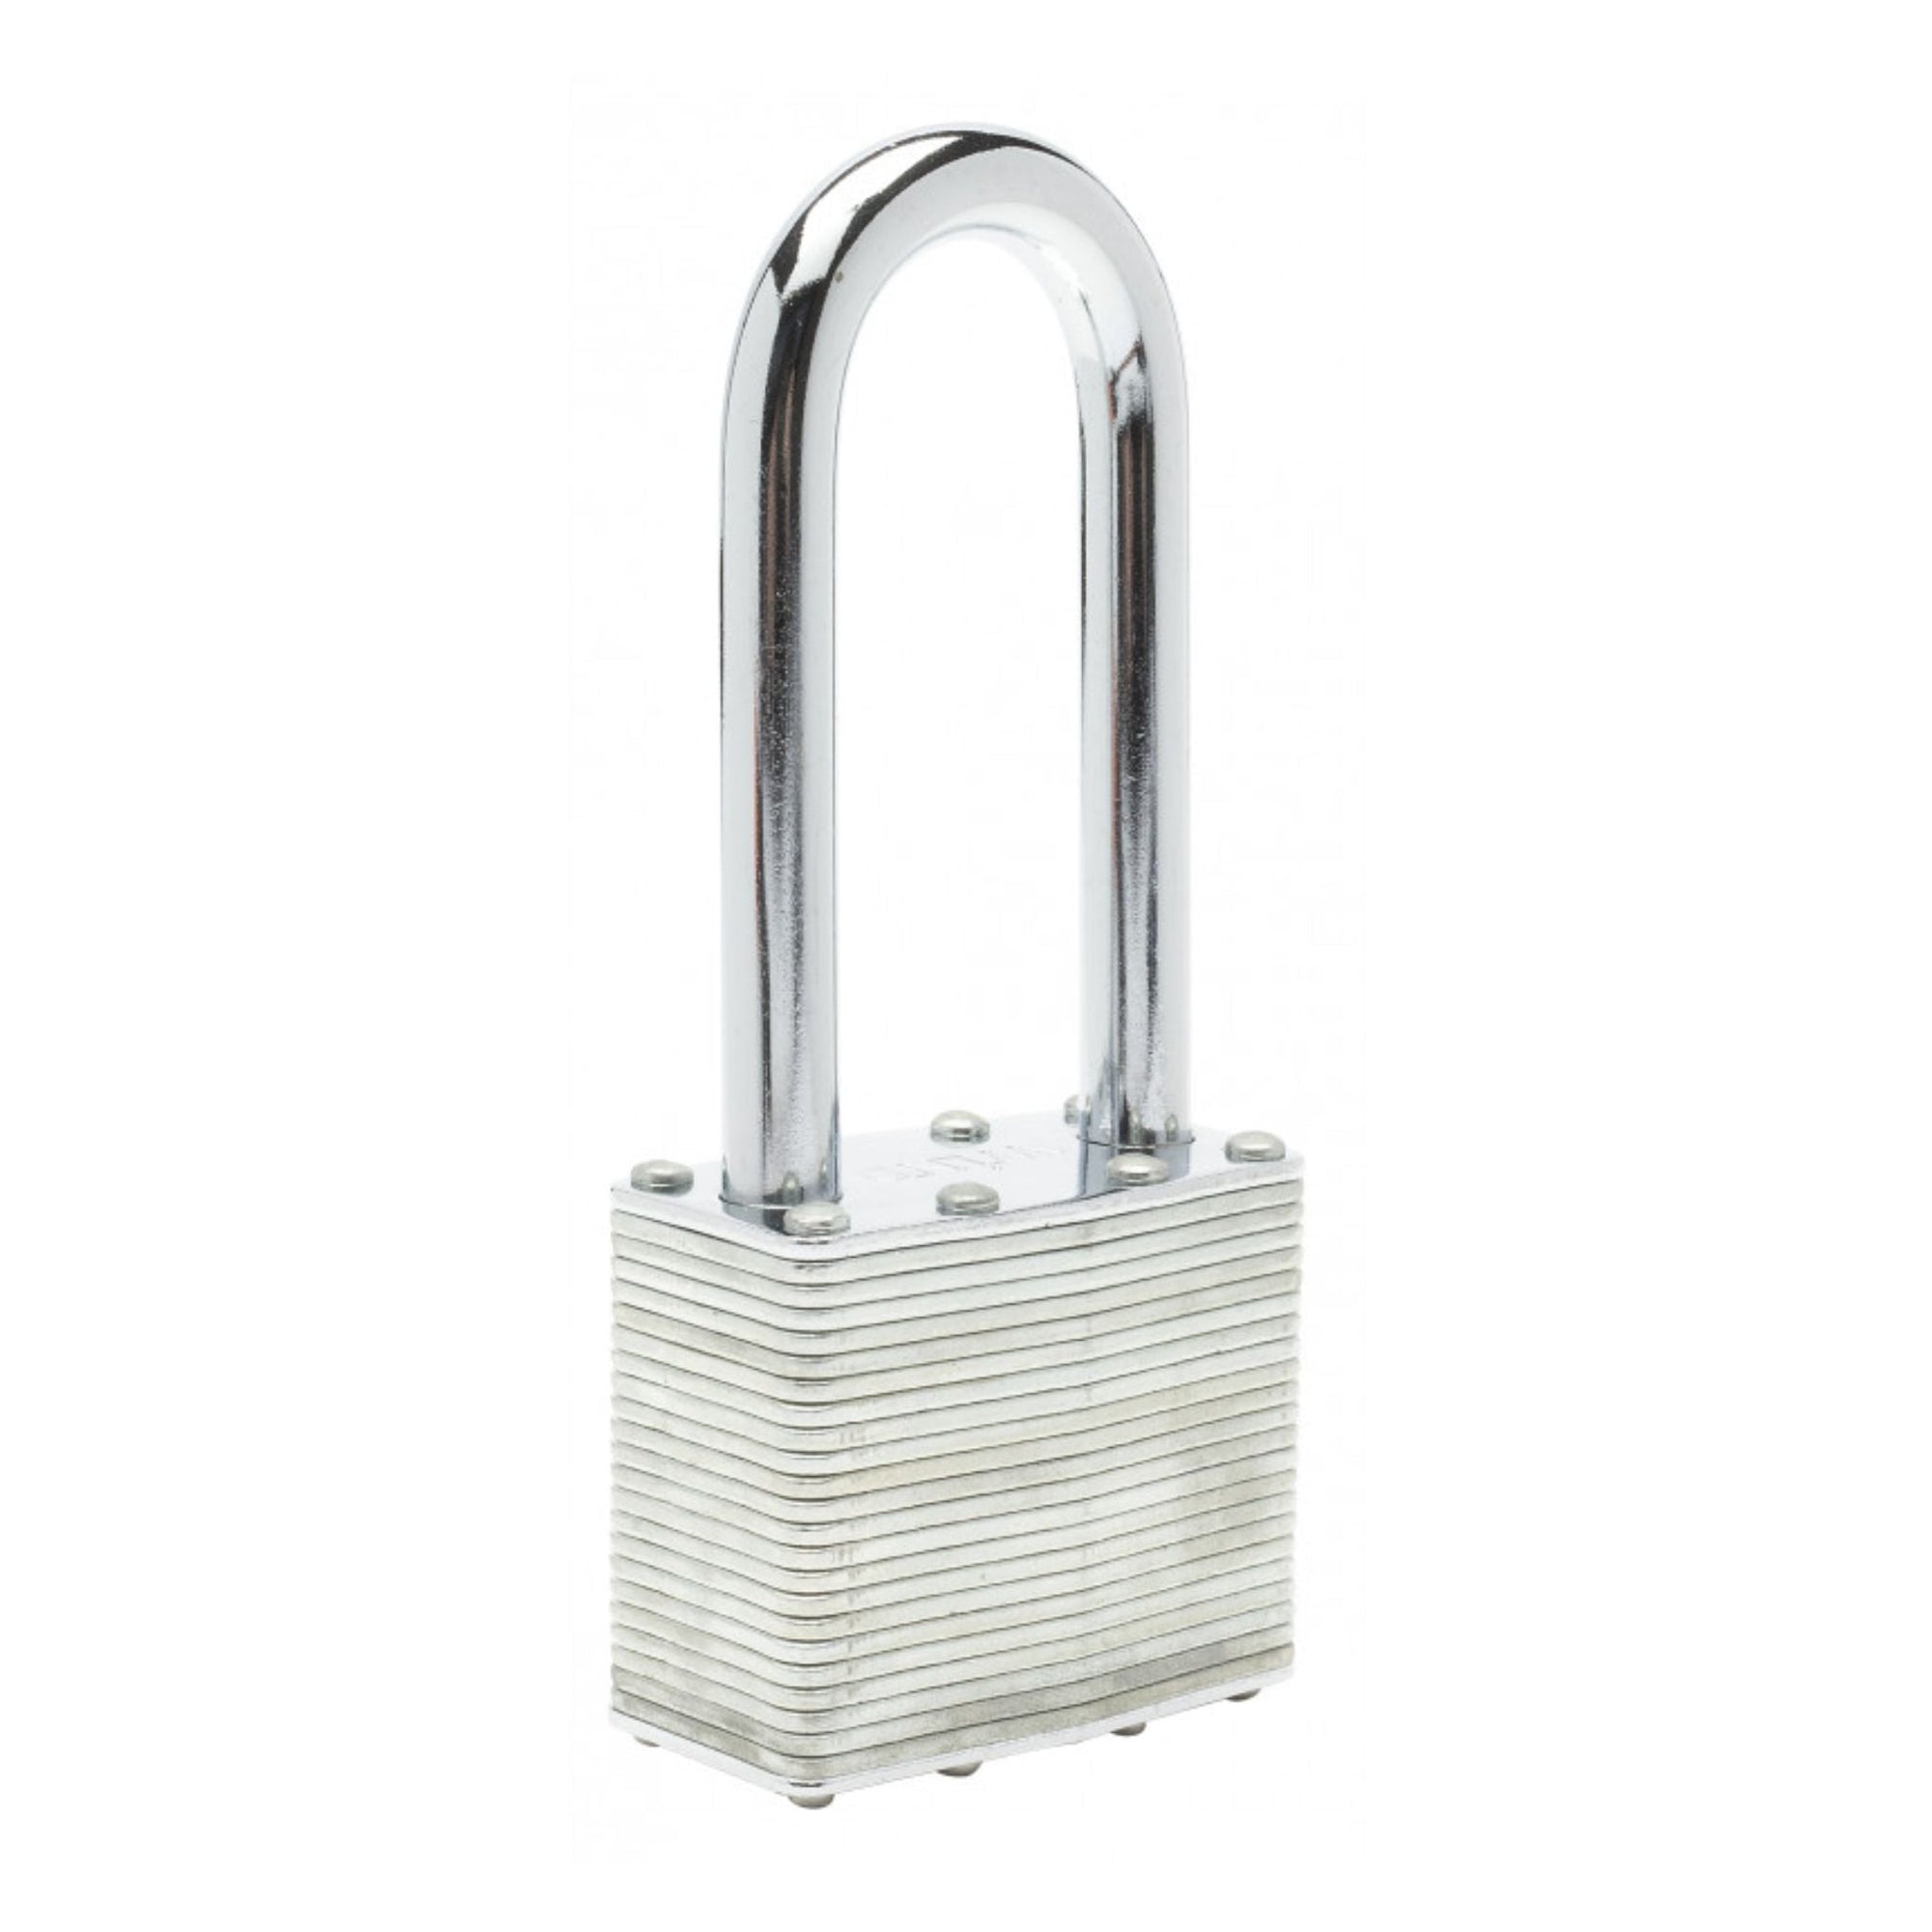 Zephyr Lock 18050 Resettable Combination Padlocks With Laminated Steel Body and 2-1/2" Long Shackle - The Lock Source